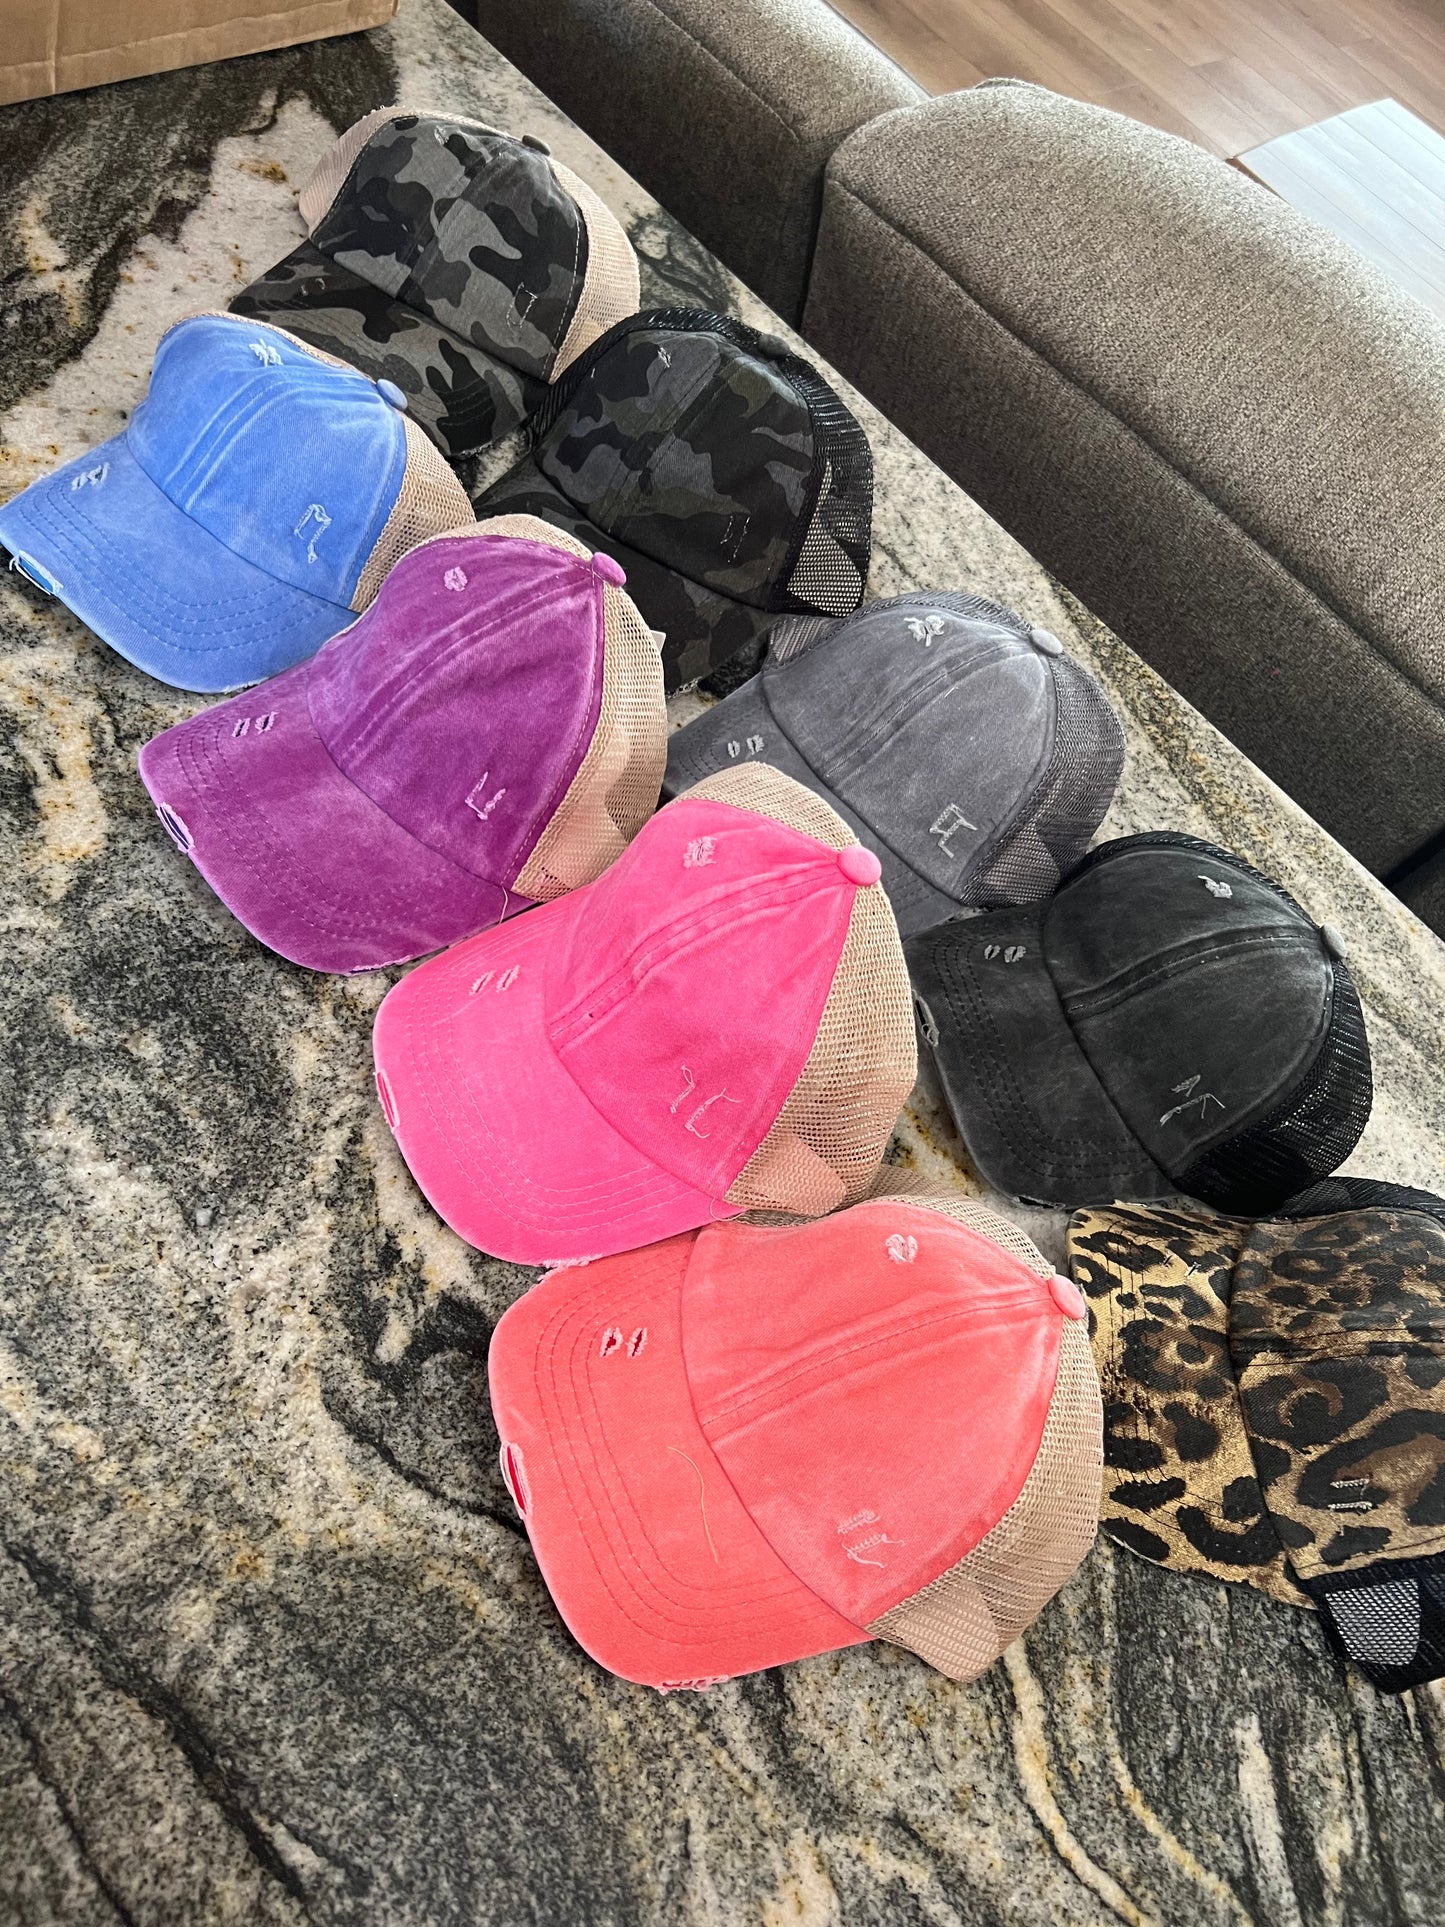 C.C. Washed Denim Pony Tail Hats (5 Colors)